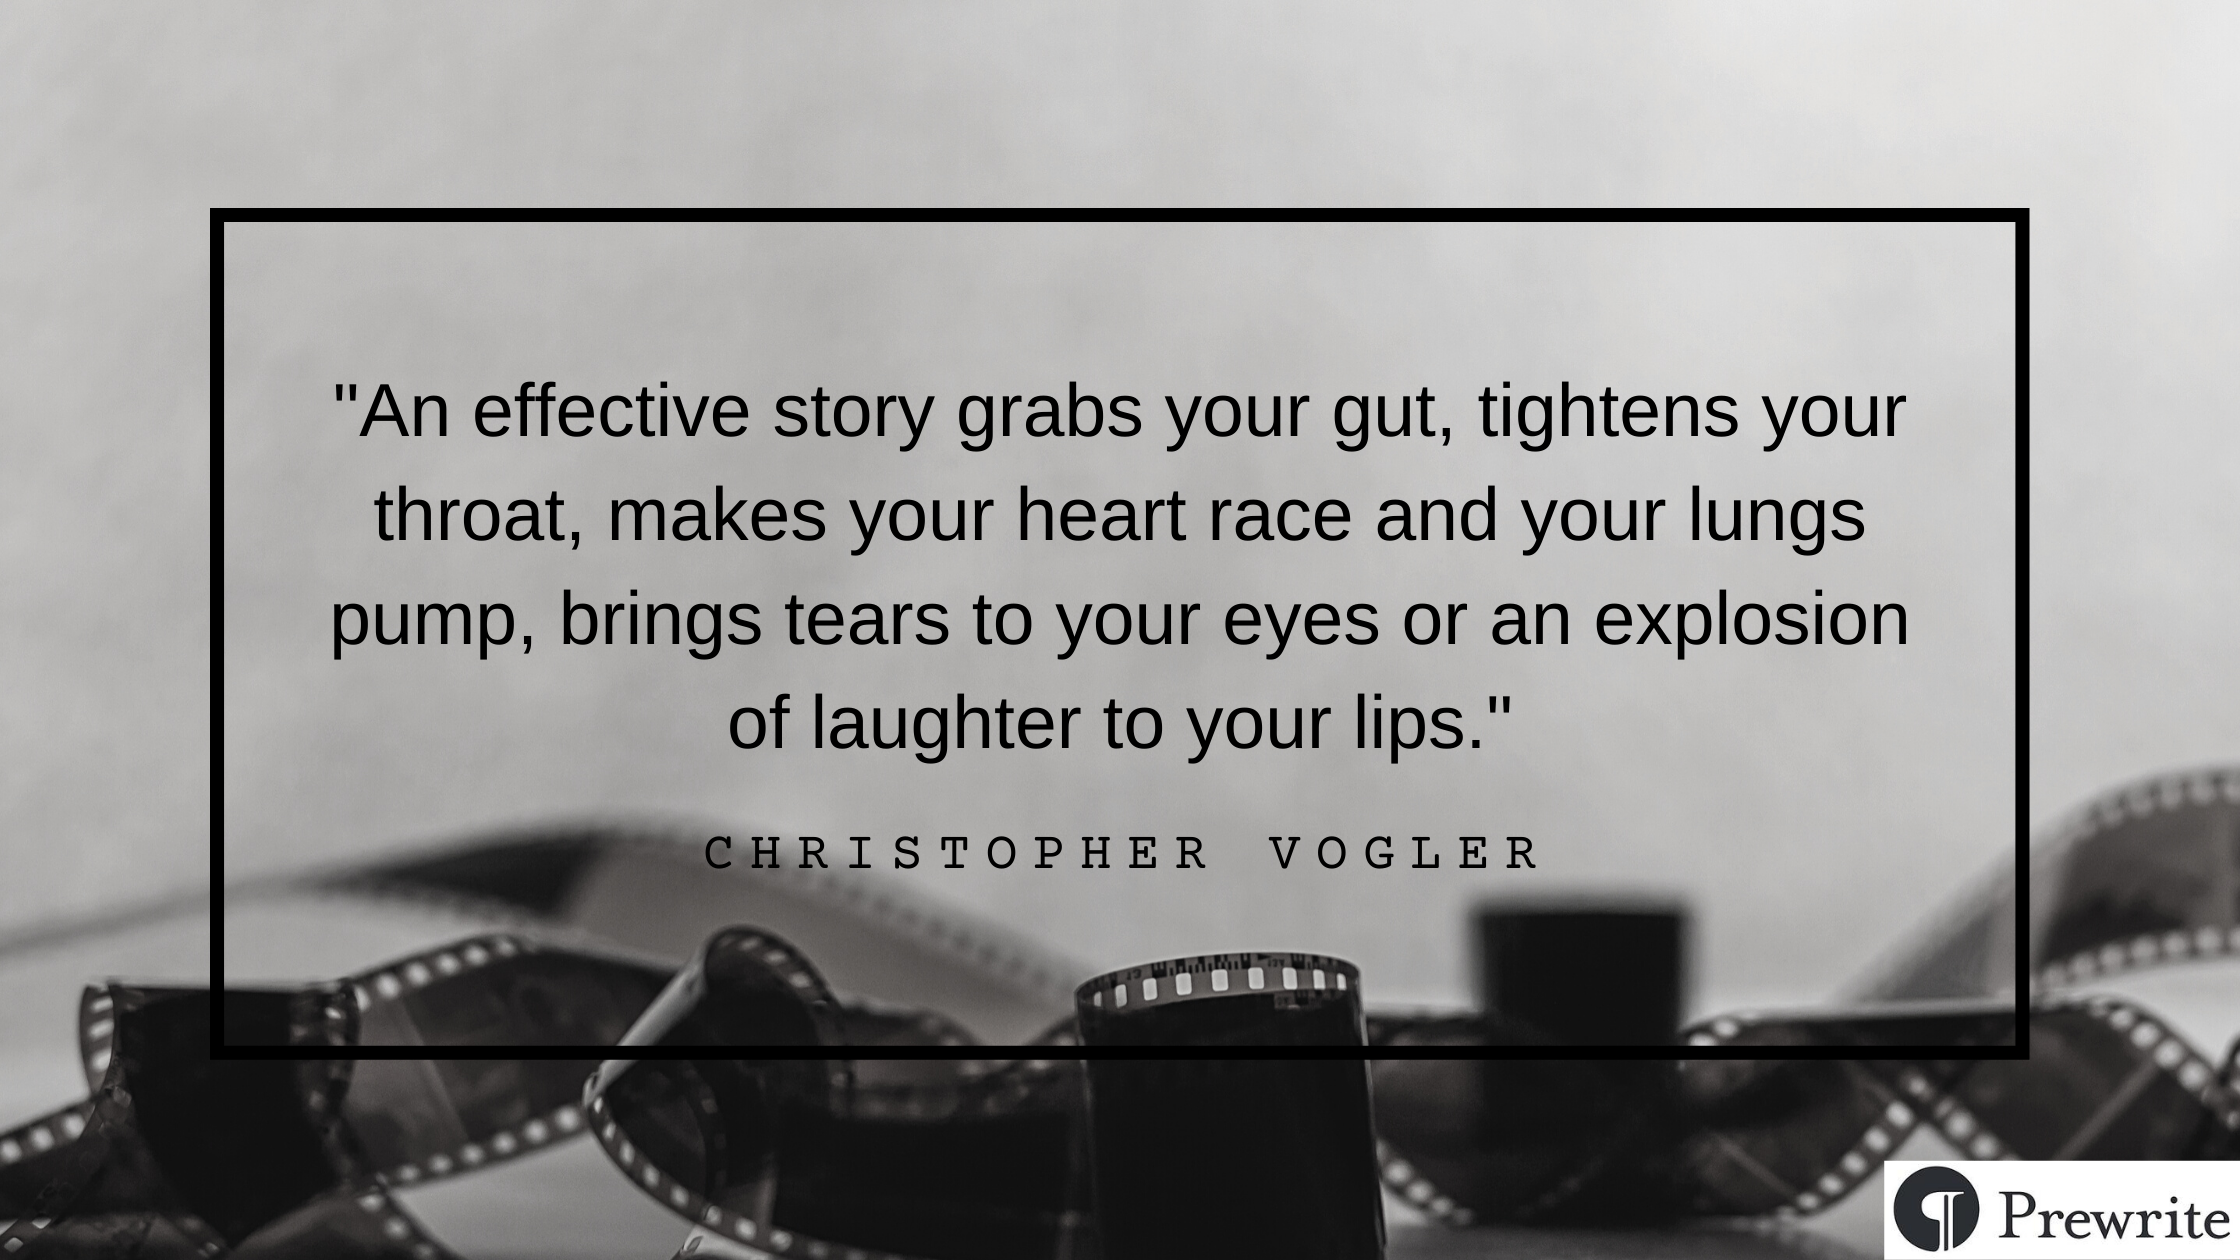 Christopher Vogler quote: An effective story grabs your gut, tightens your throat, makes your heart race and your lungs pump, brings tears to your eyes or an explosion of laughter to your lips.